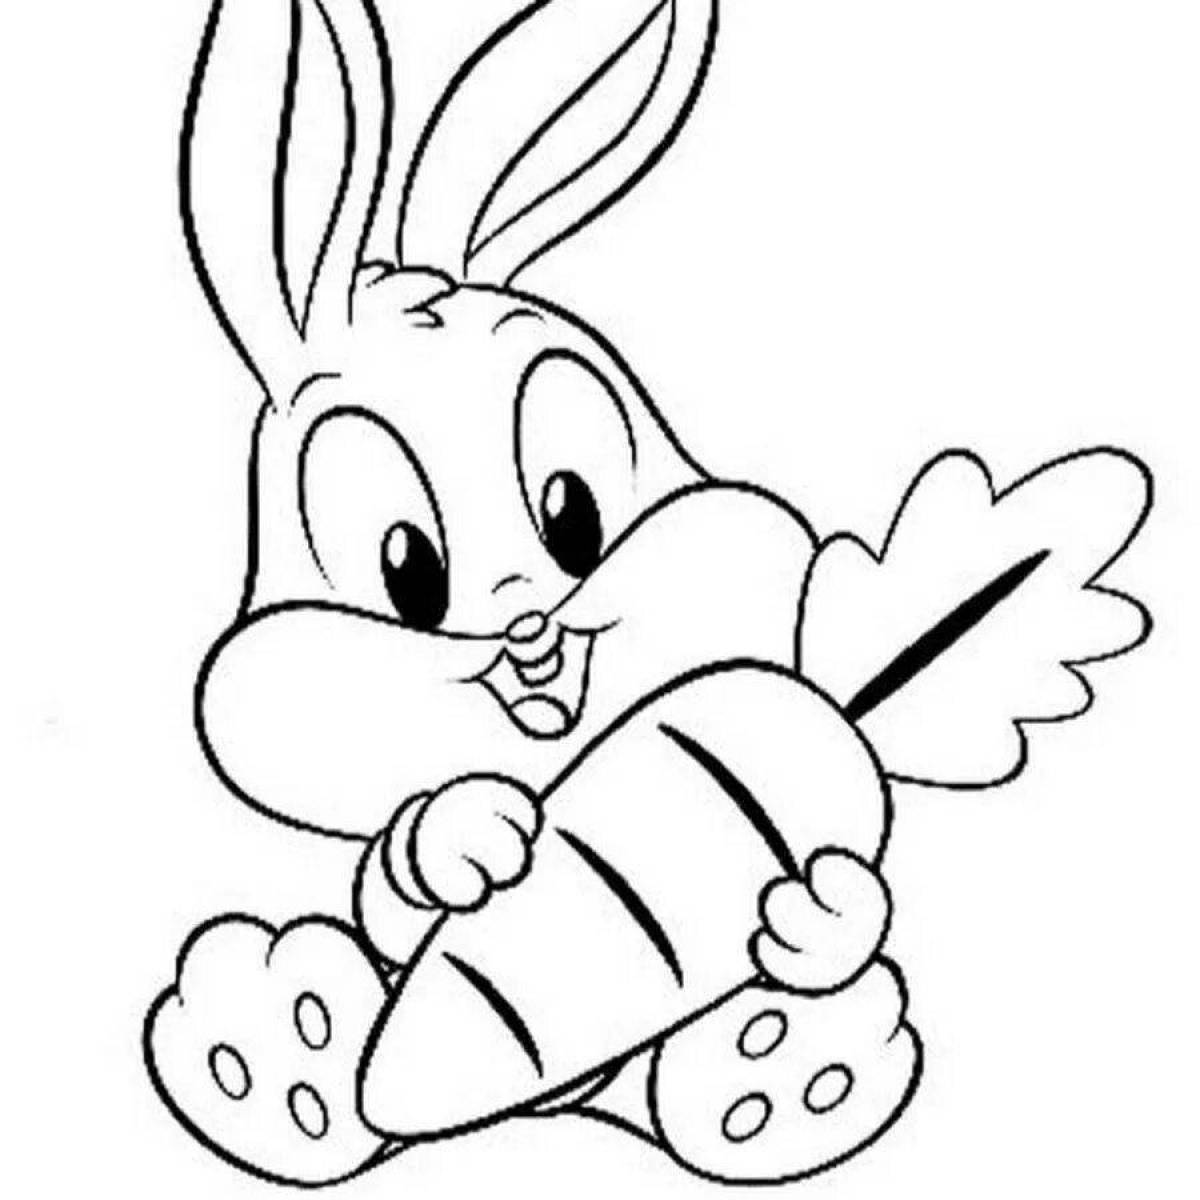 Coloring book smiling rabbit with a heart